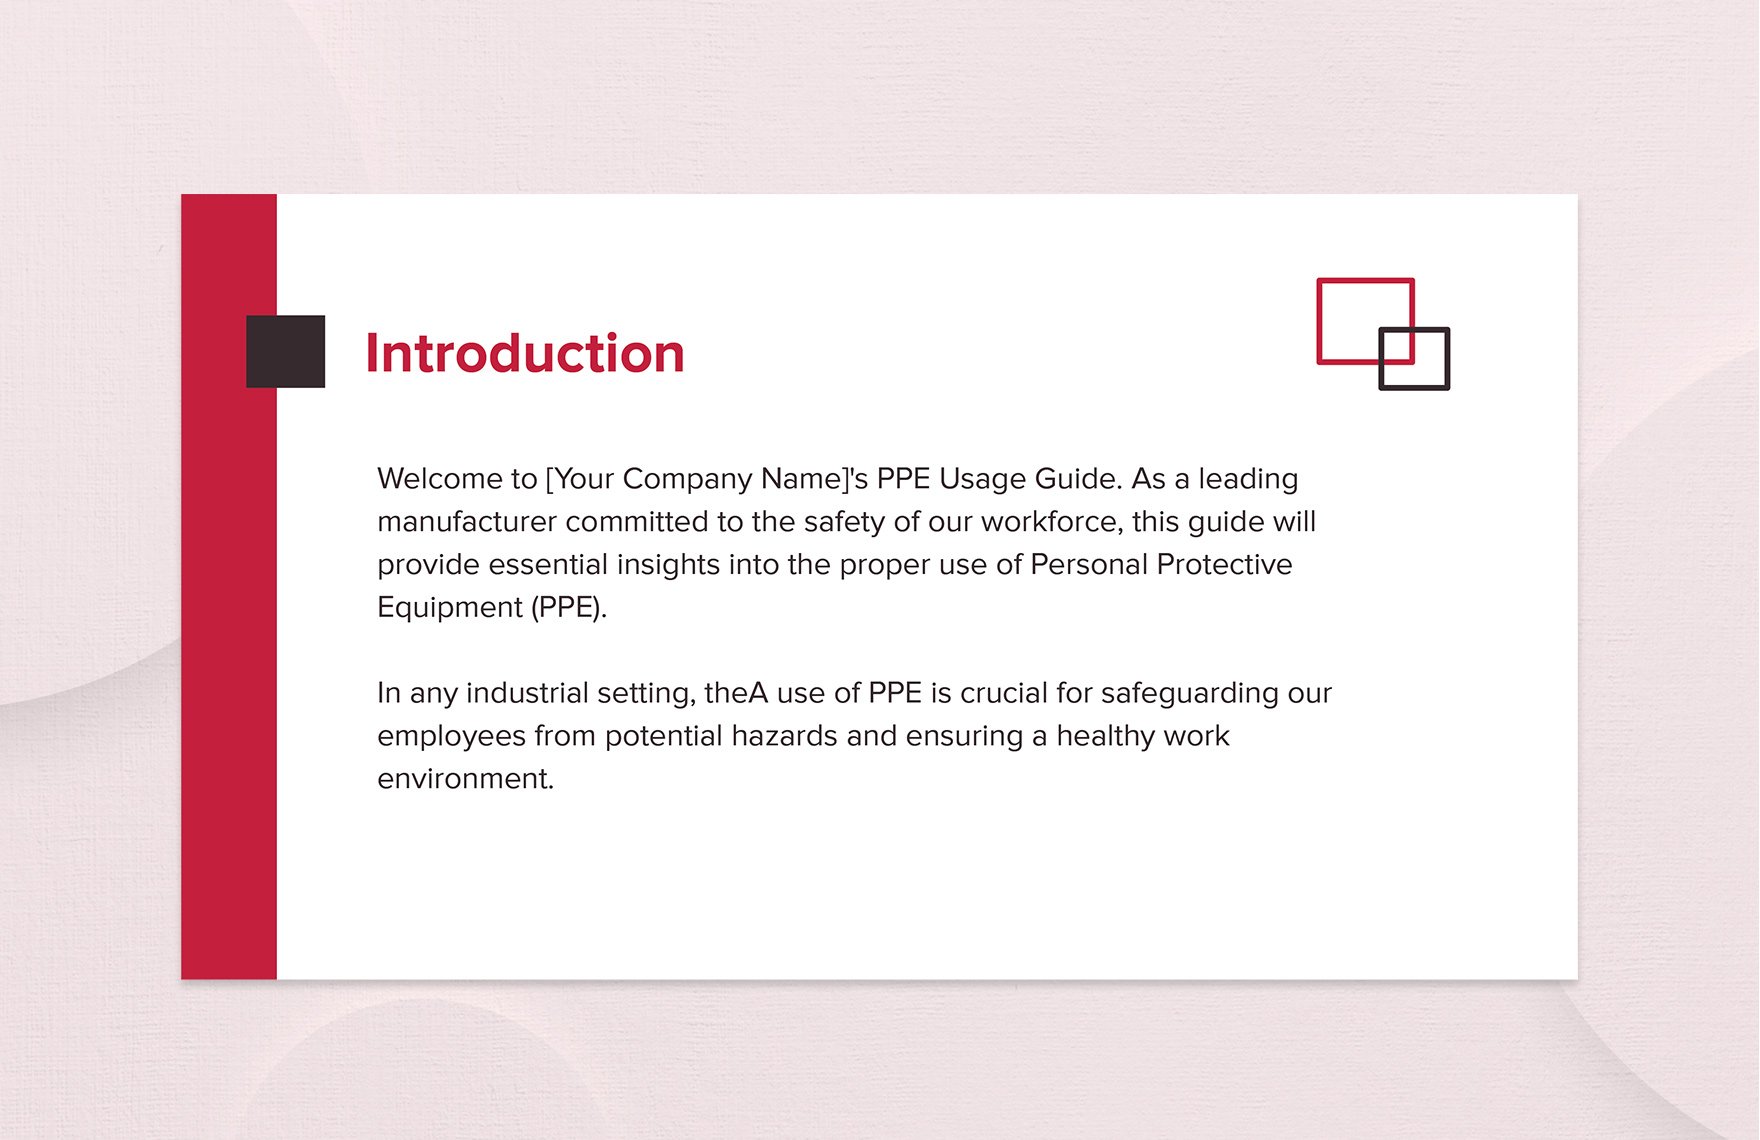 Personal Protective Equipment Usage Guide Presentation Template